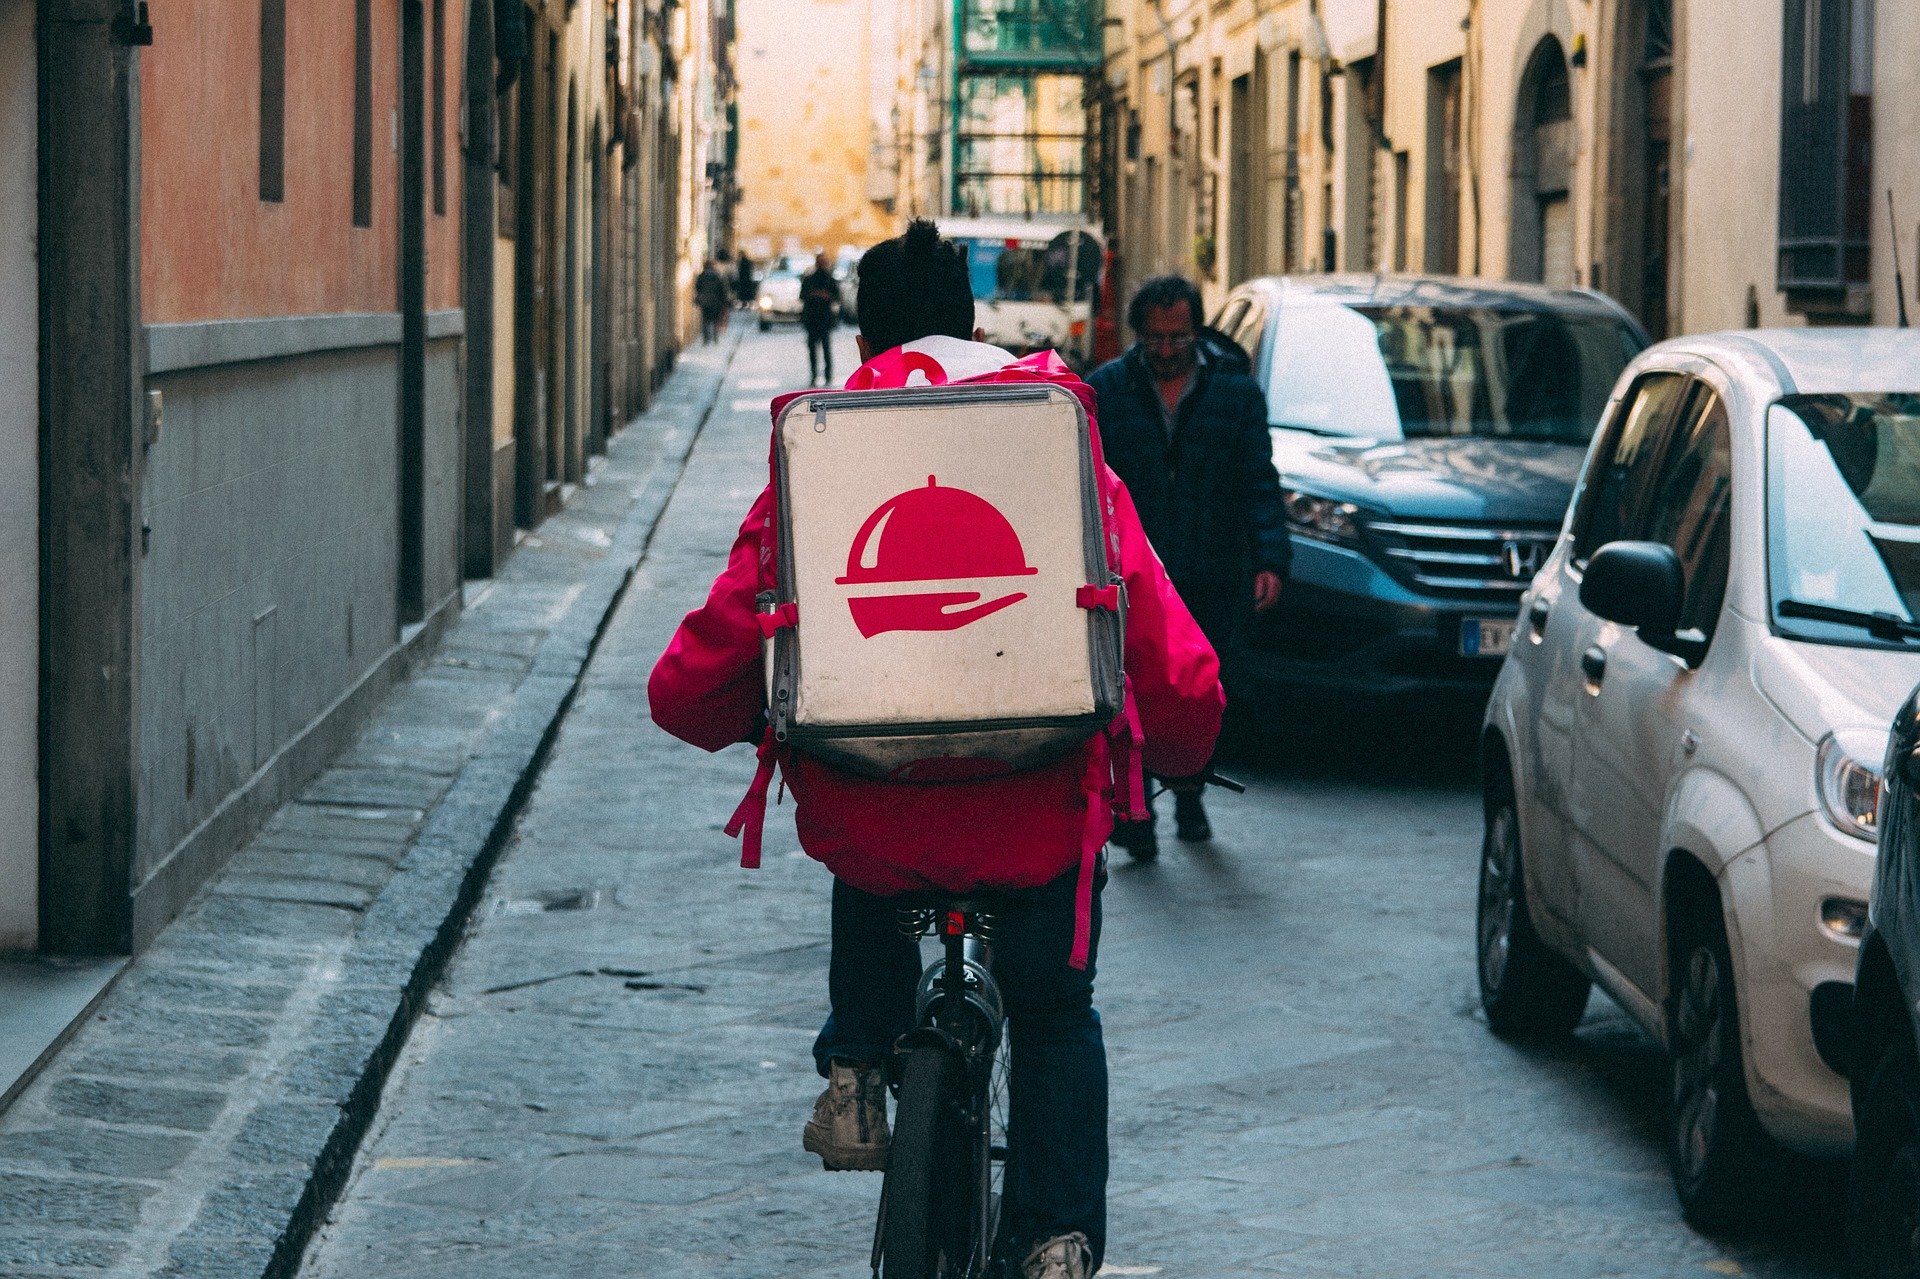 Food Delivery by Foodora